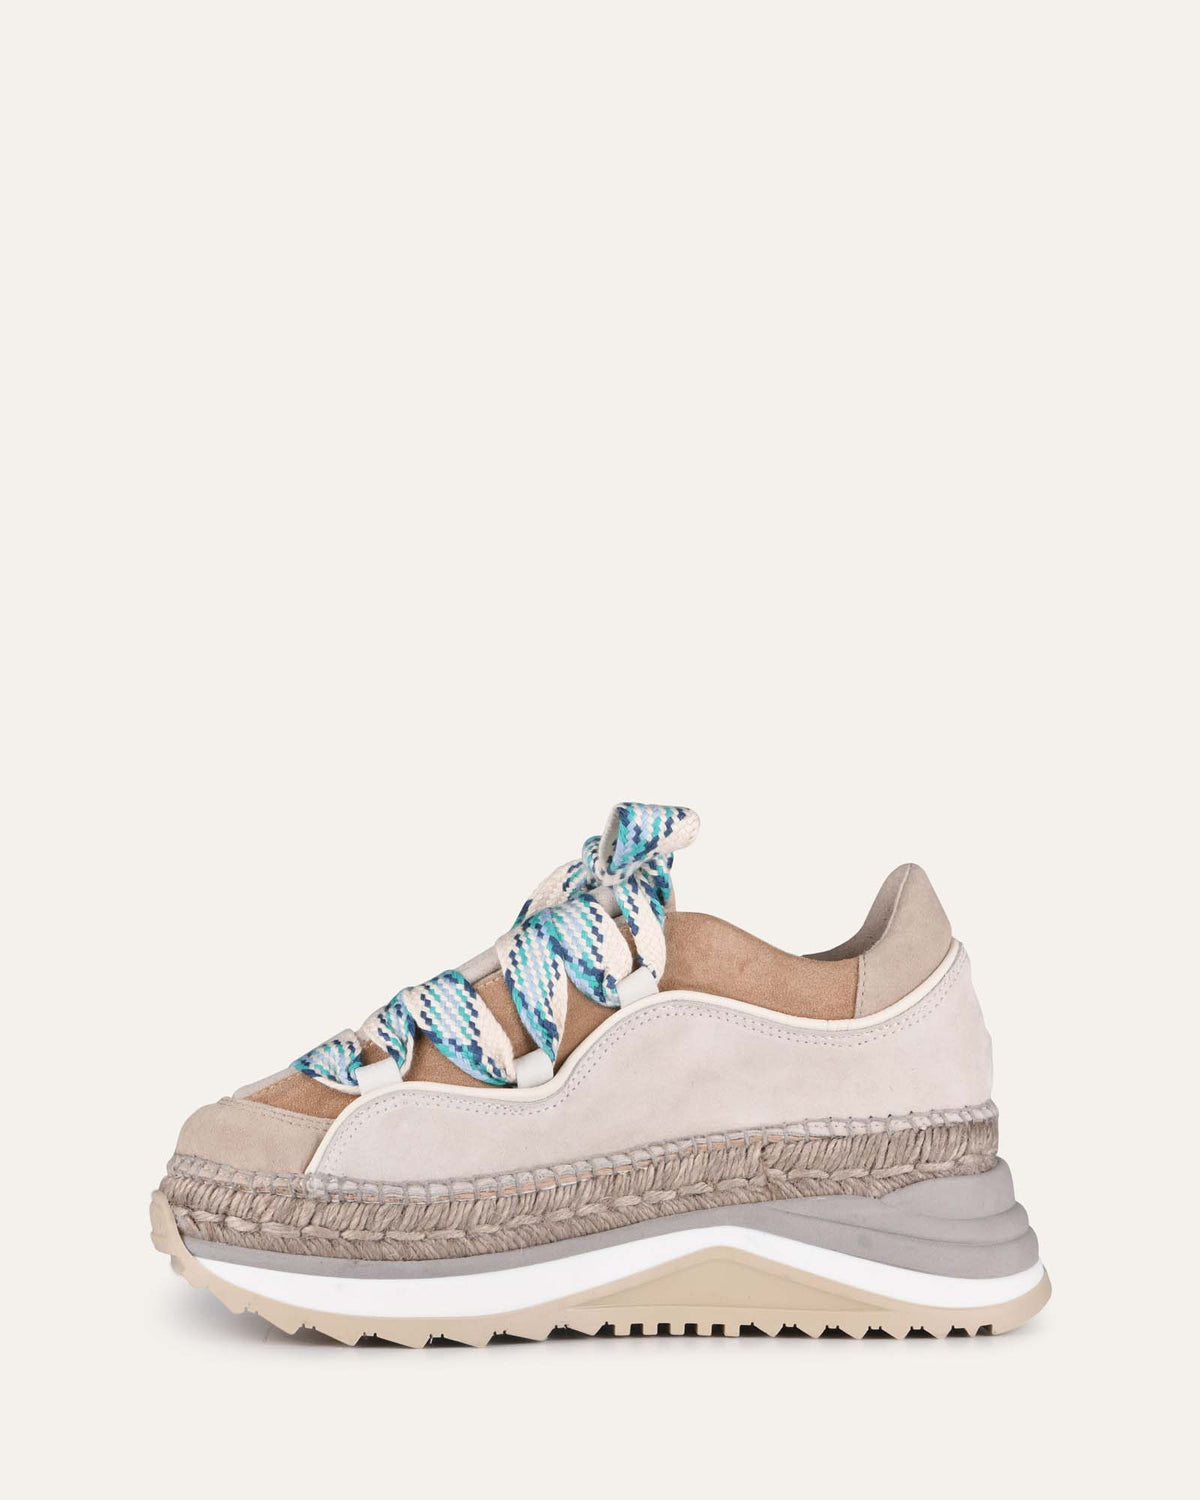 ADELA SNEAKERS TAUPE MULTI SUEDE